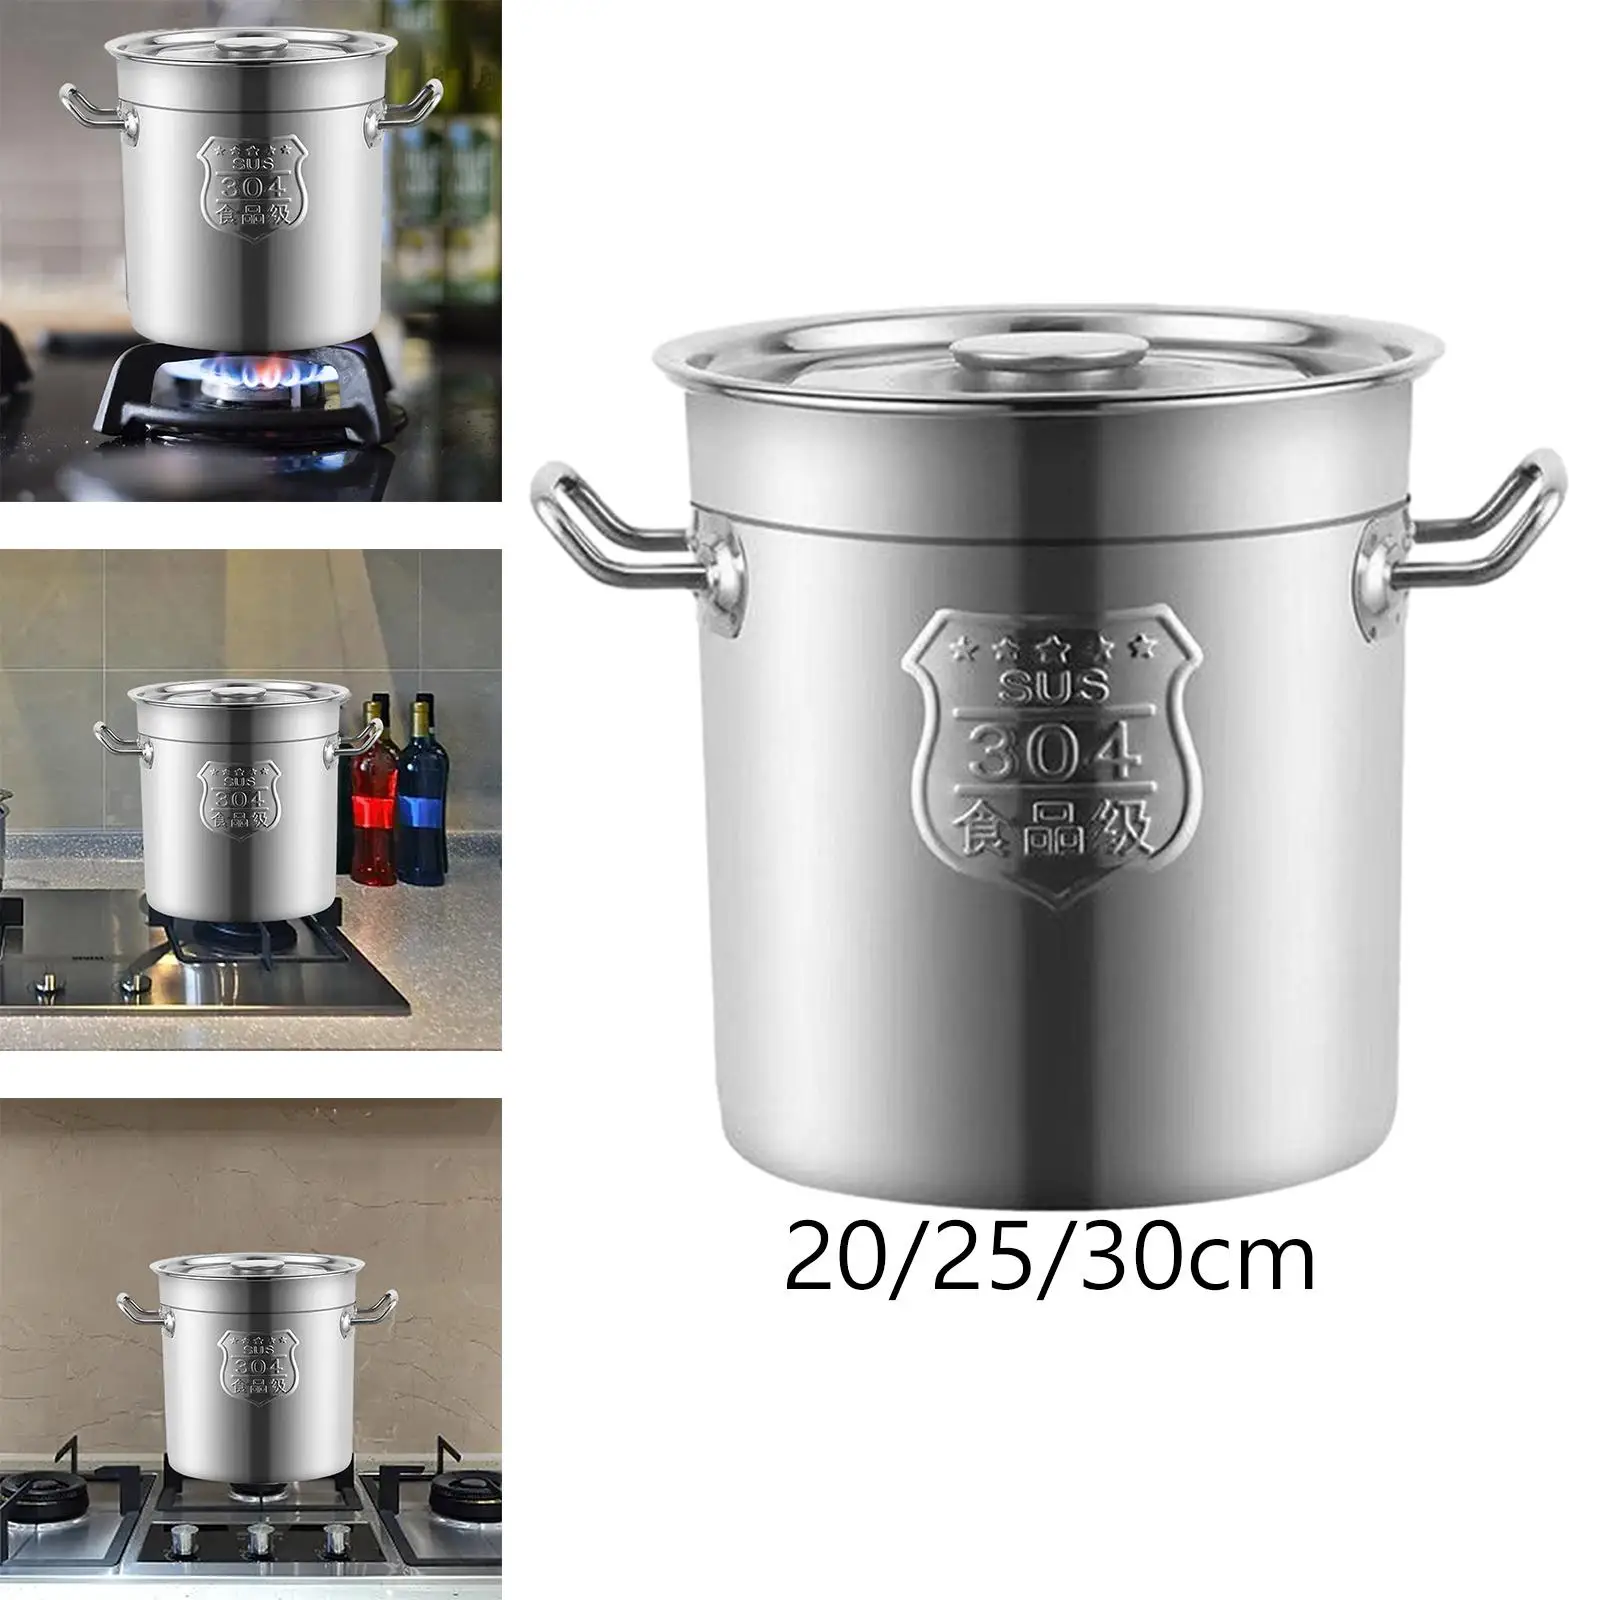 Stainless Steel Soup Pot Polished Easy to Clean Double Handle Cookware Cooking Stew Soup Water Bucket Cooking Pot for Hotel Home